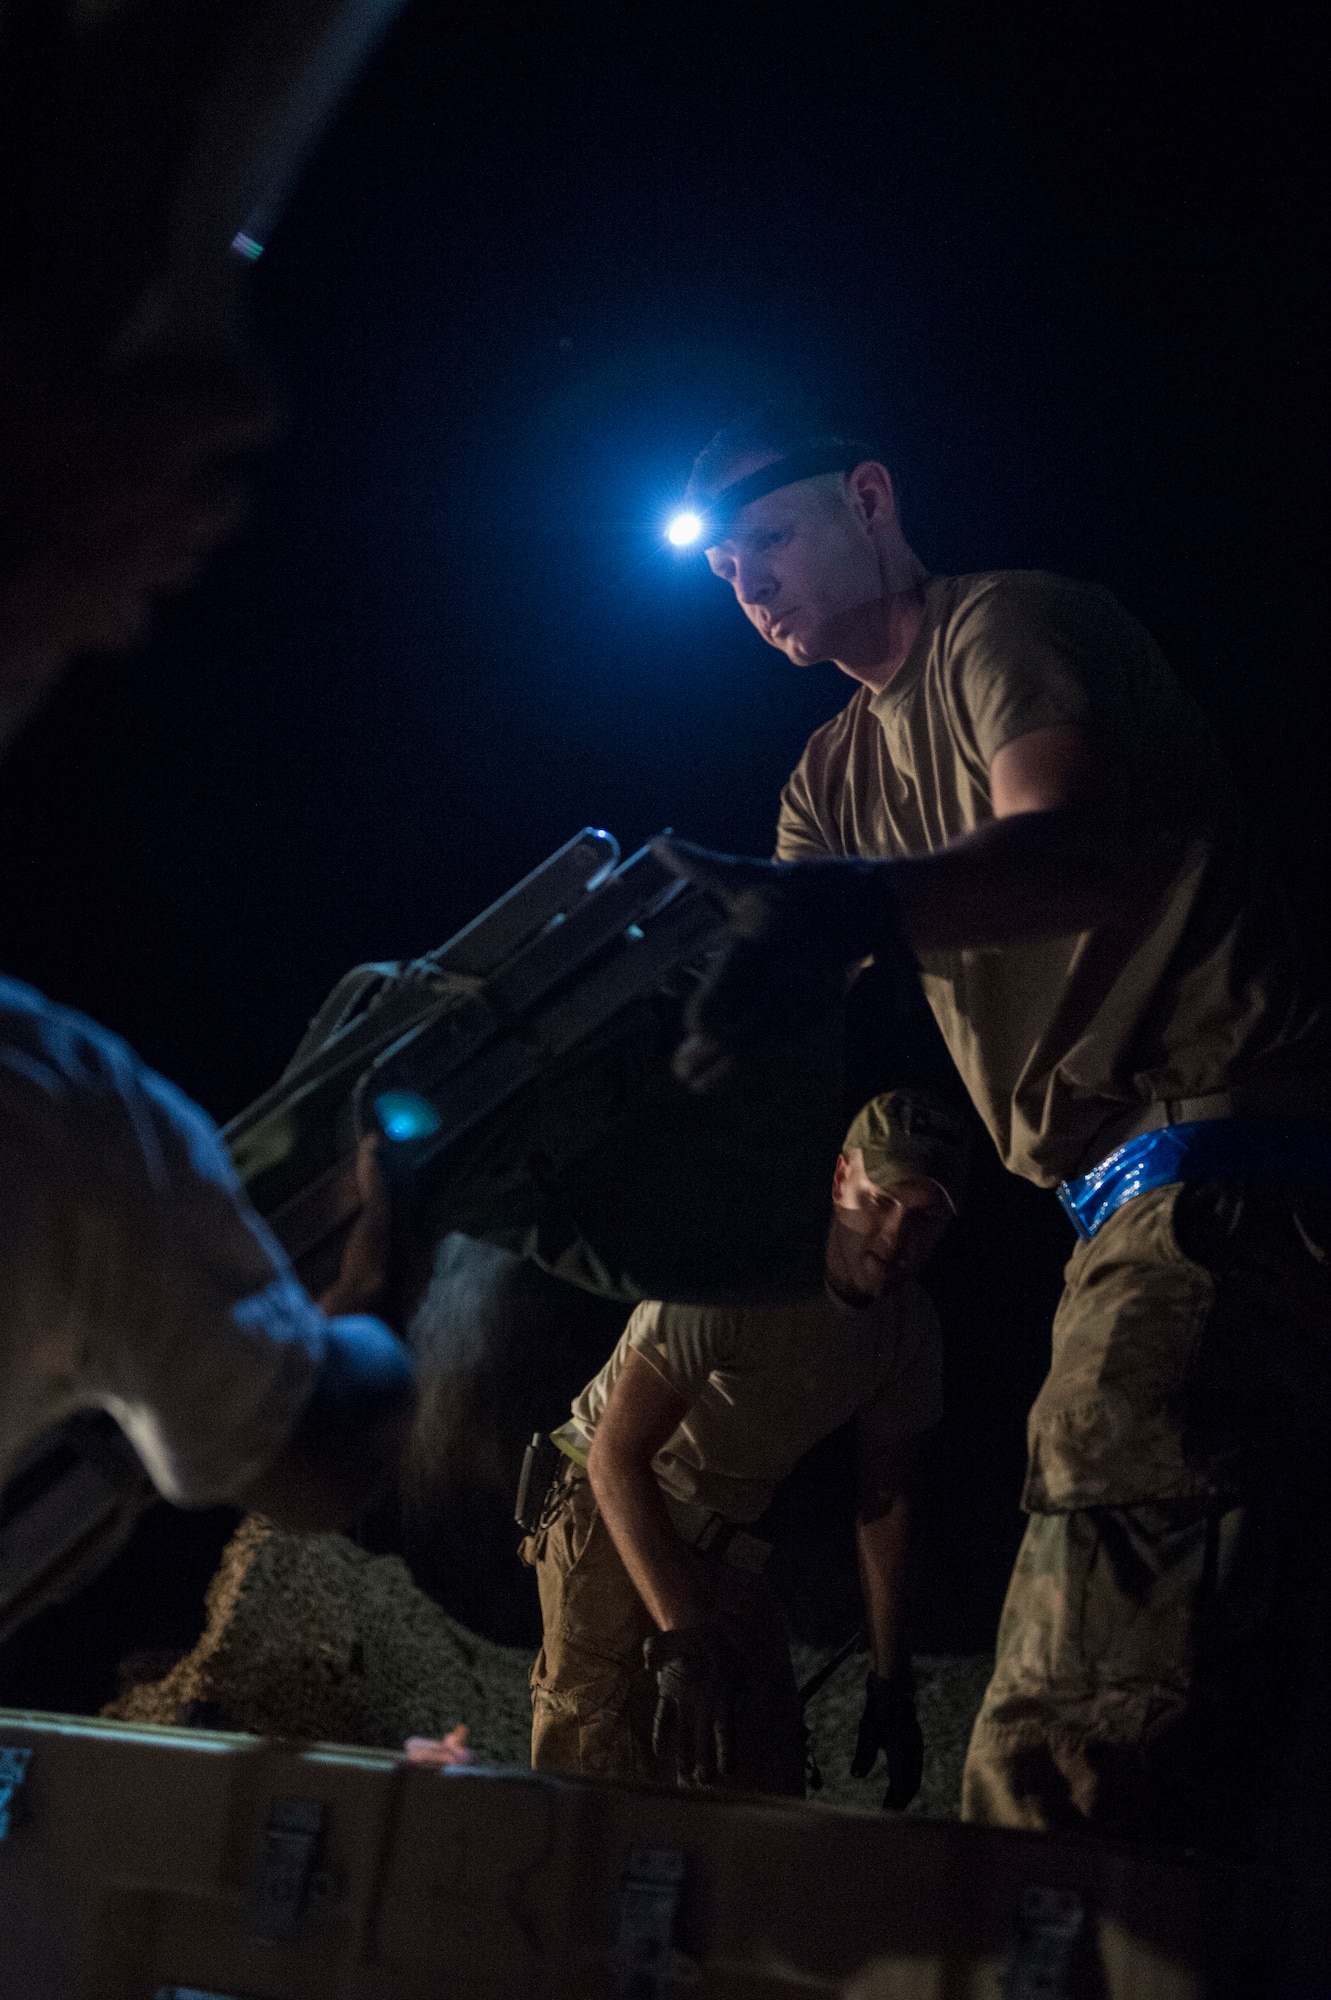 Airmen from the 621st Contingency Response Group pack supplies onto a pallet in preparation to redeploy at Prince Sultan Air Base, Kingdom of Saudi Arabia, July 27, 2019. Most construction and deconstruction operations take place at night to avoid heat-related complications. The 621st CRG deployed for an air base opening mission in response to the White House authorization of approximately 1,000 additional troops in U.S. Central Command's area of responsibility for defensive purposes to address air, naval, and ground-based threats in the Middle East. (U.S. Air Force photo by Staff Sgt. Sarah Brice)